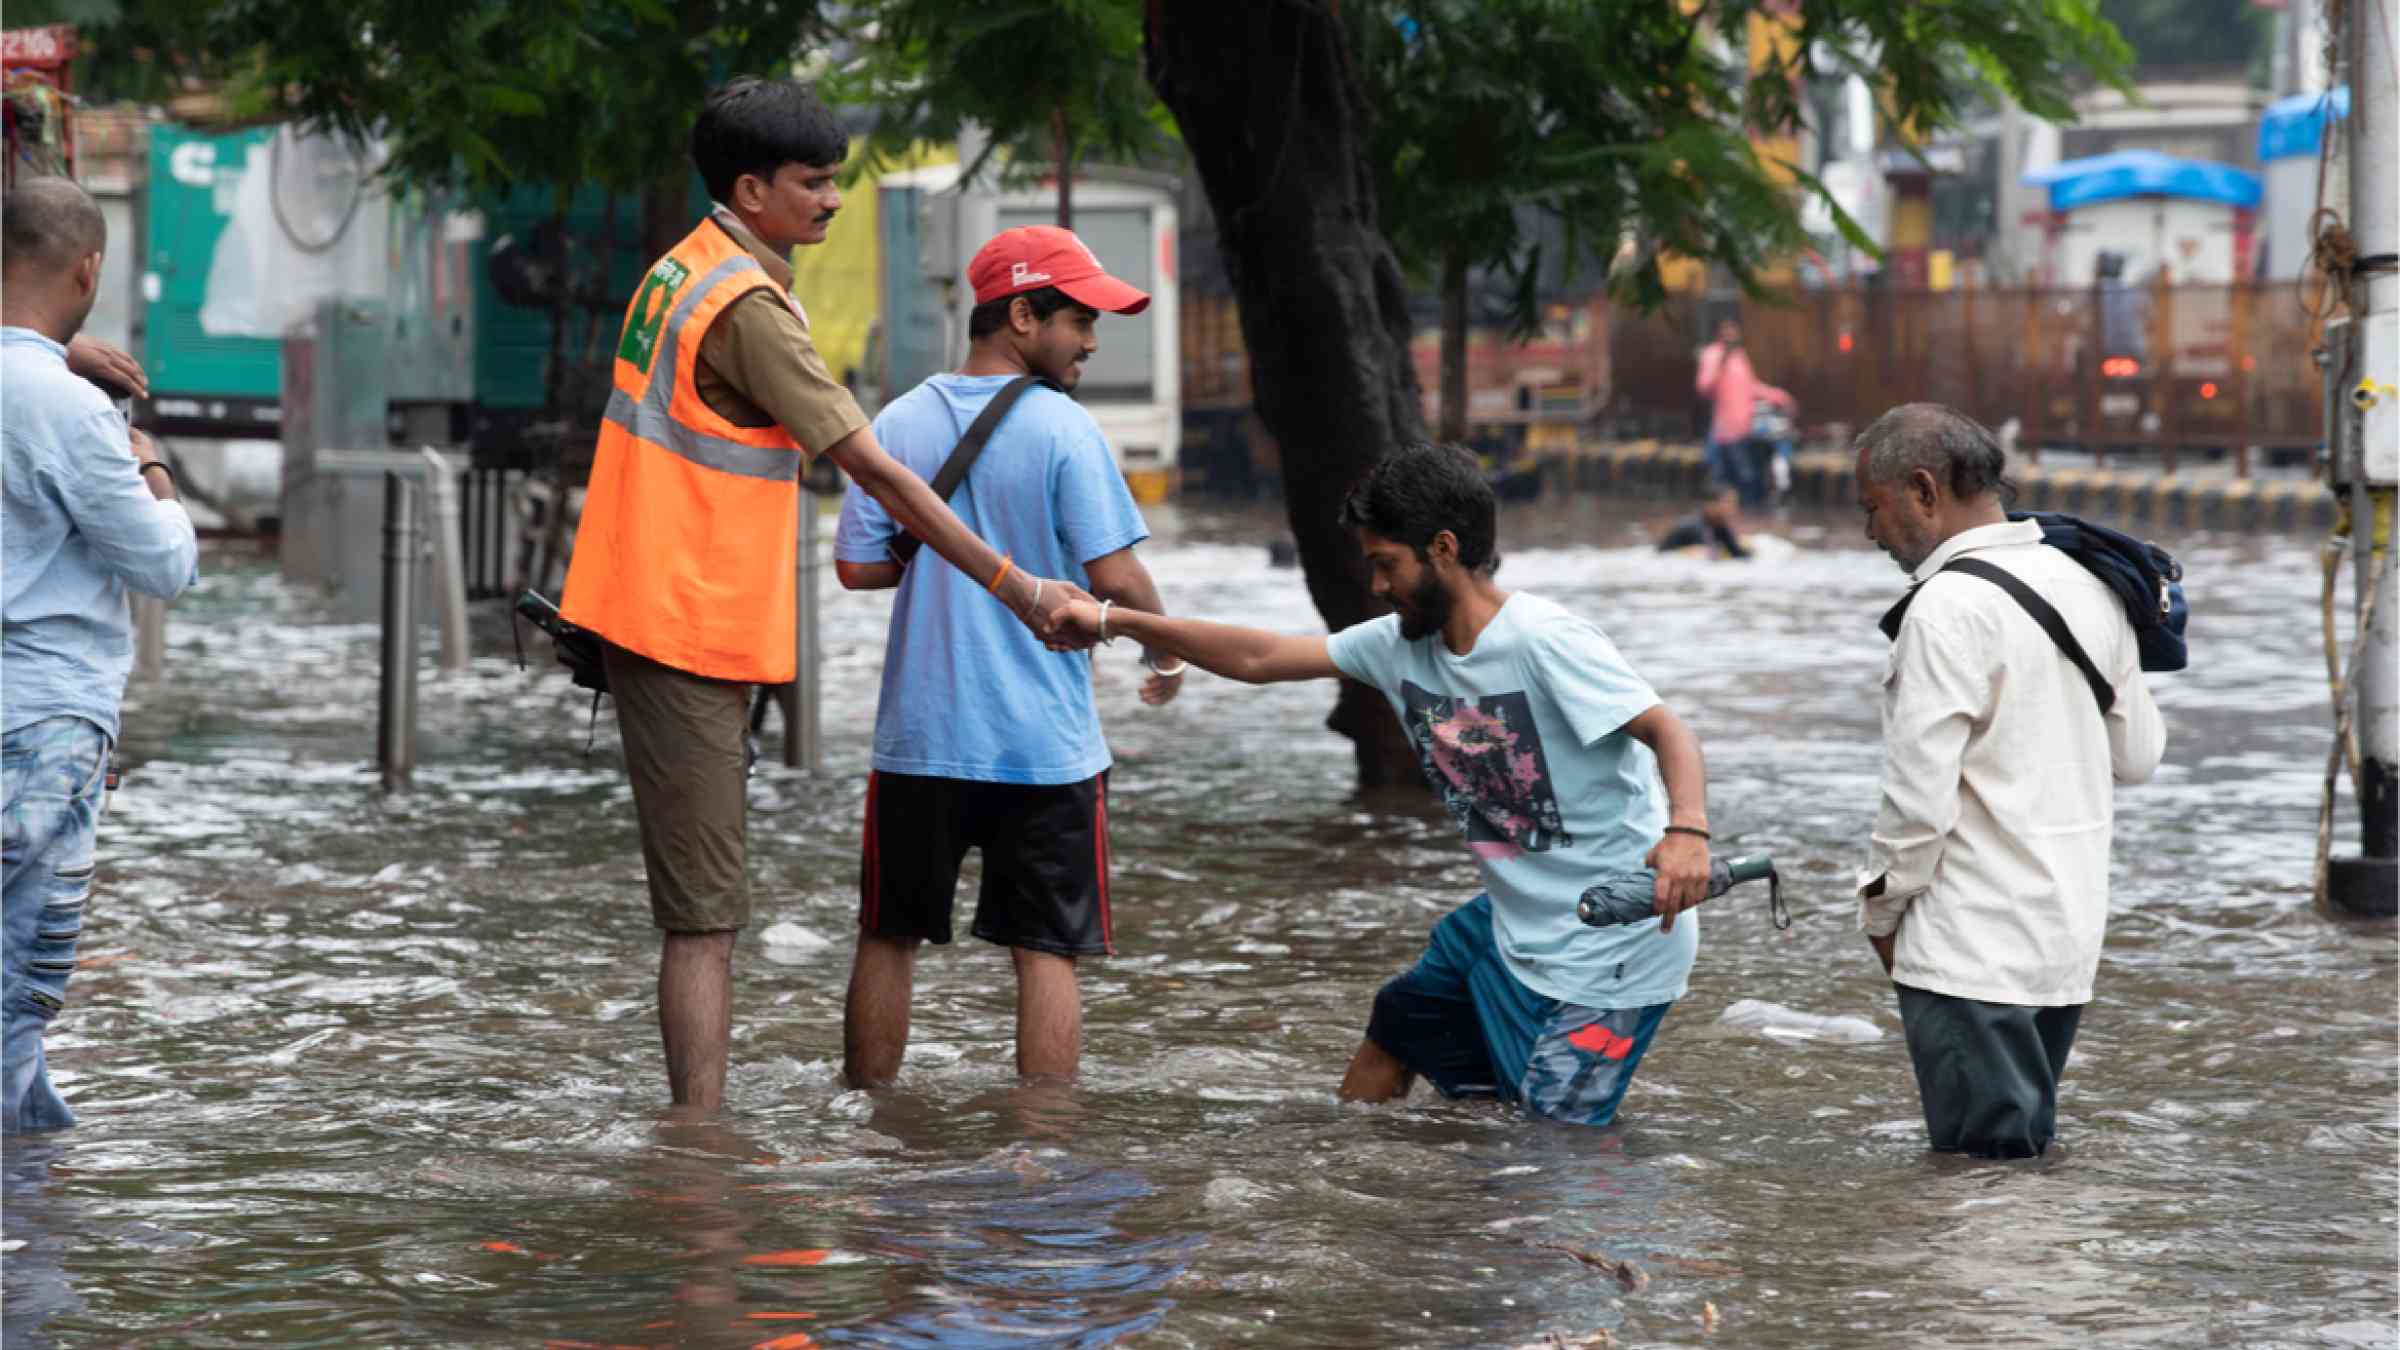 A municipal worker helps pedestrians cross flooded streets after heavy rains in Mumbai, India